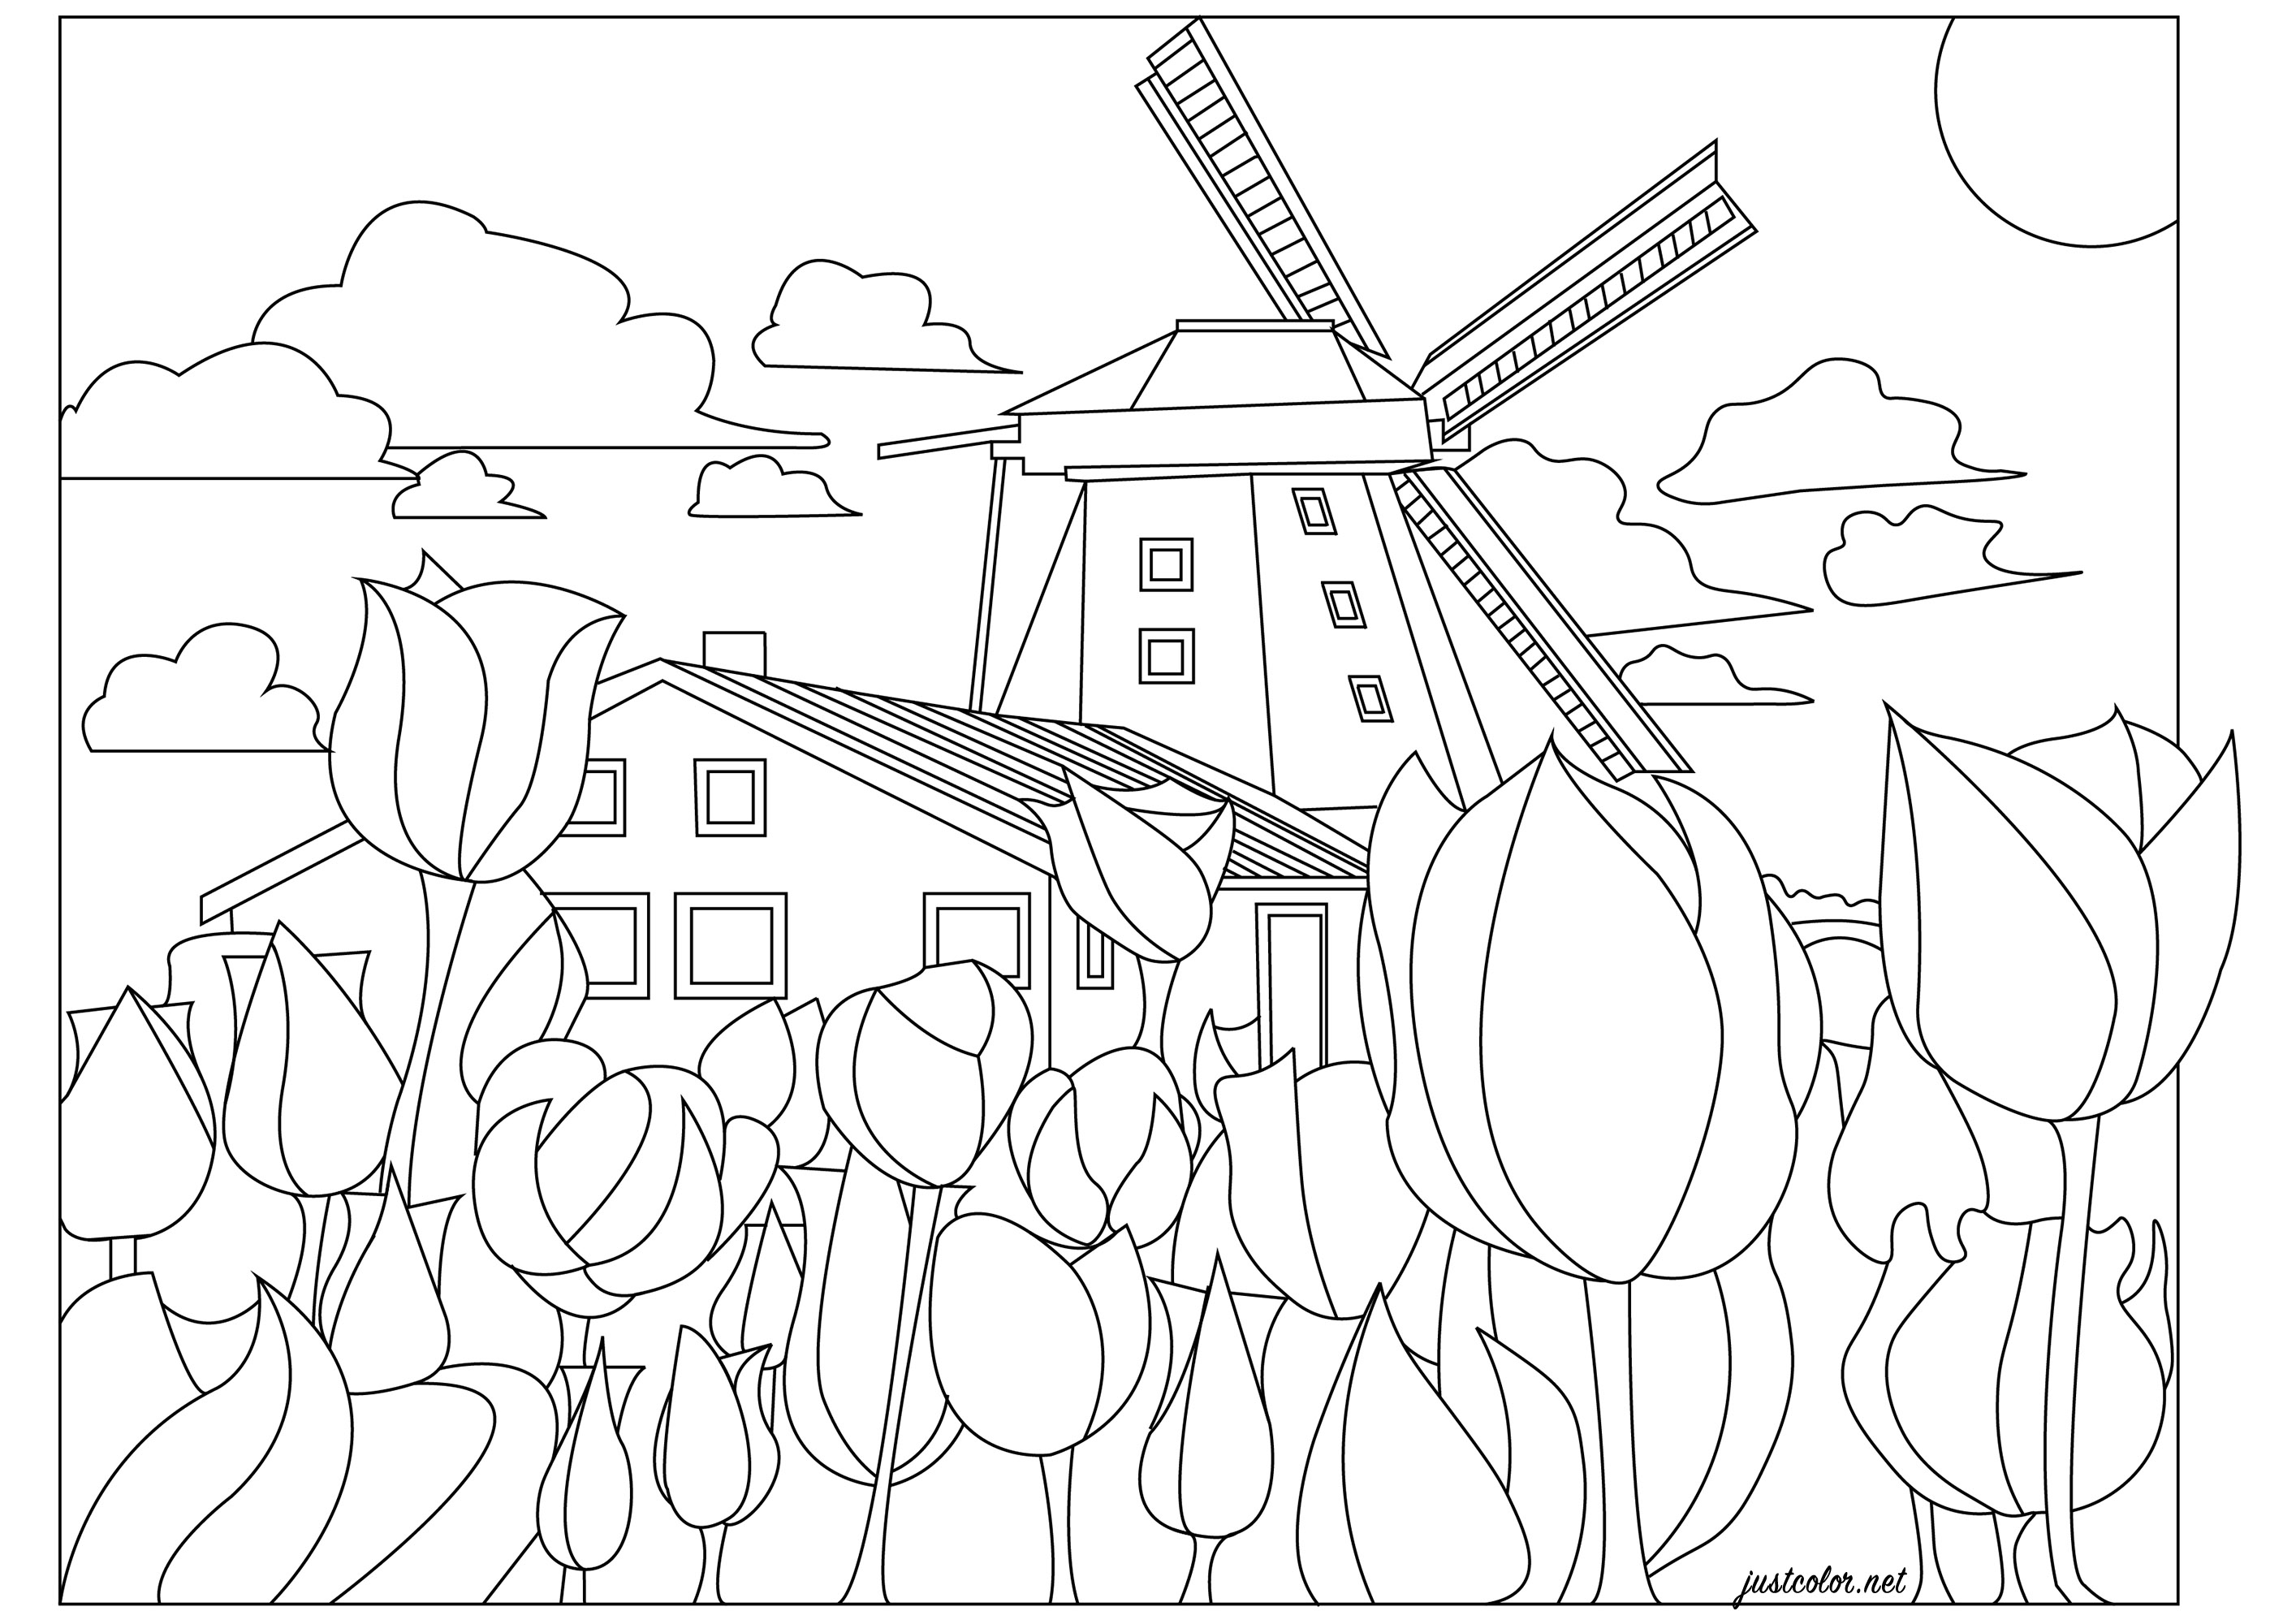 The Netherlands, the pretty country of windmills and tulip fields.The Dutch countryside in the spring! A coloring page with colorful flowers, a windmill and a typical Dutch house